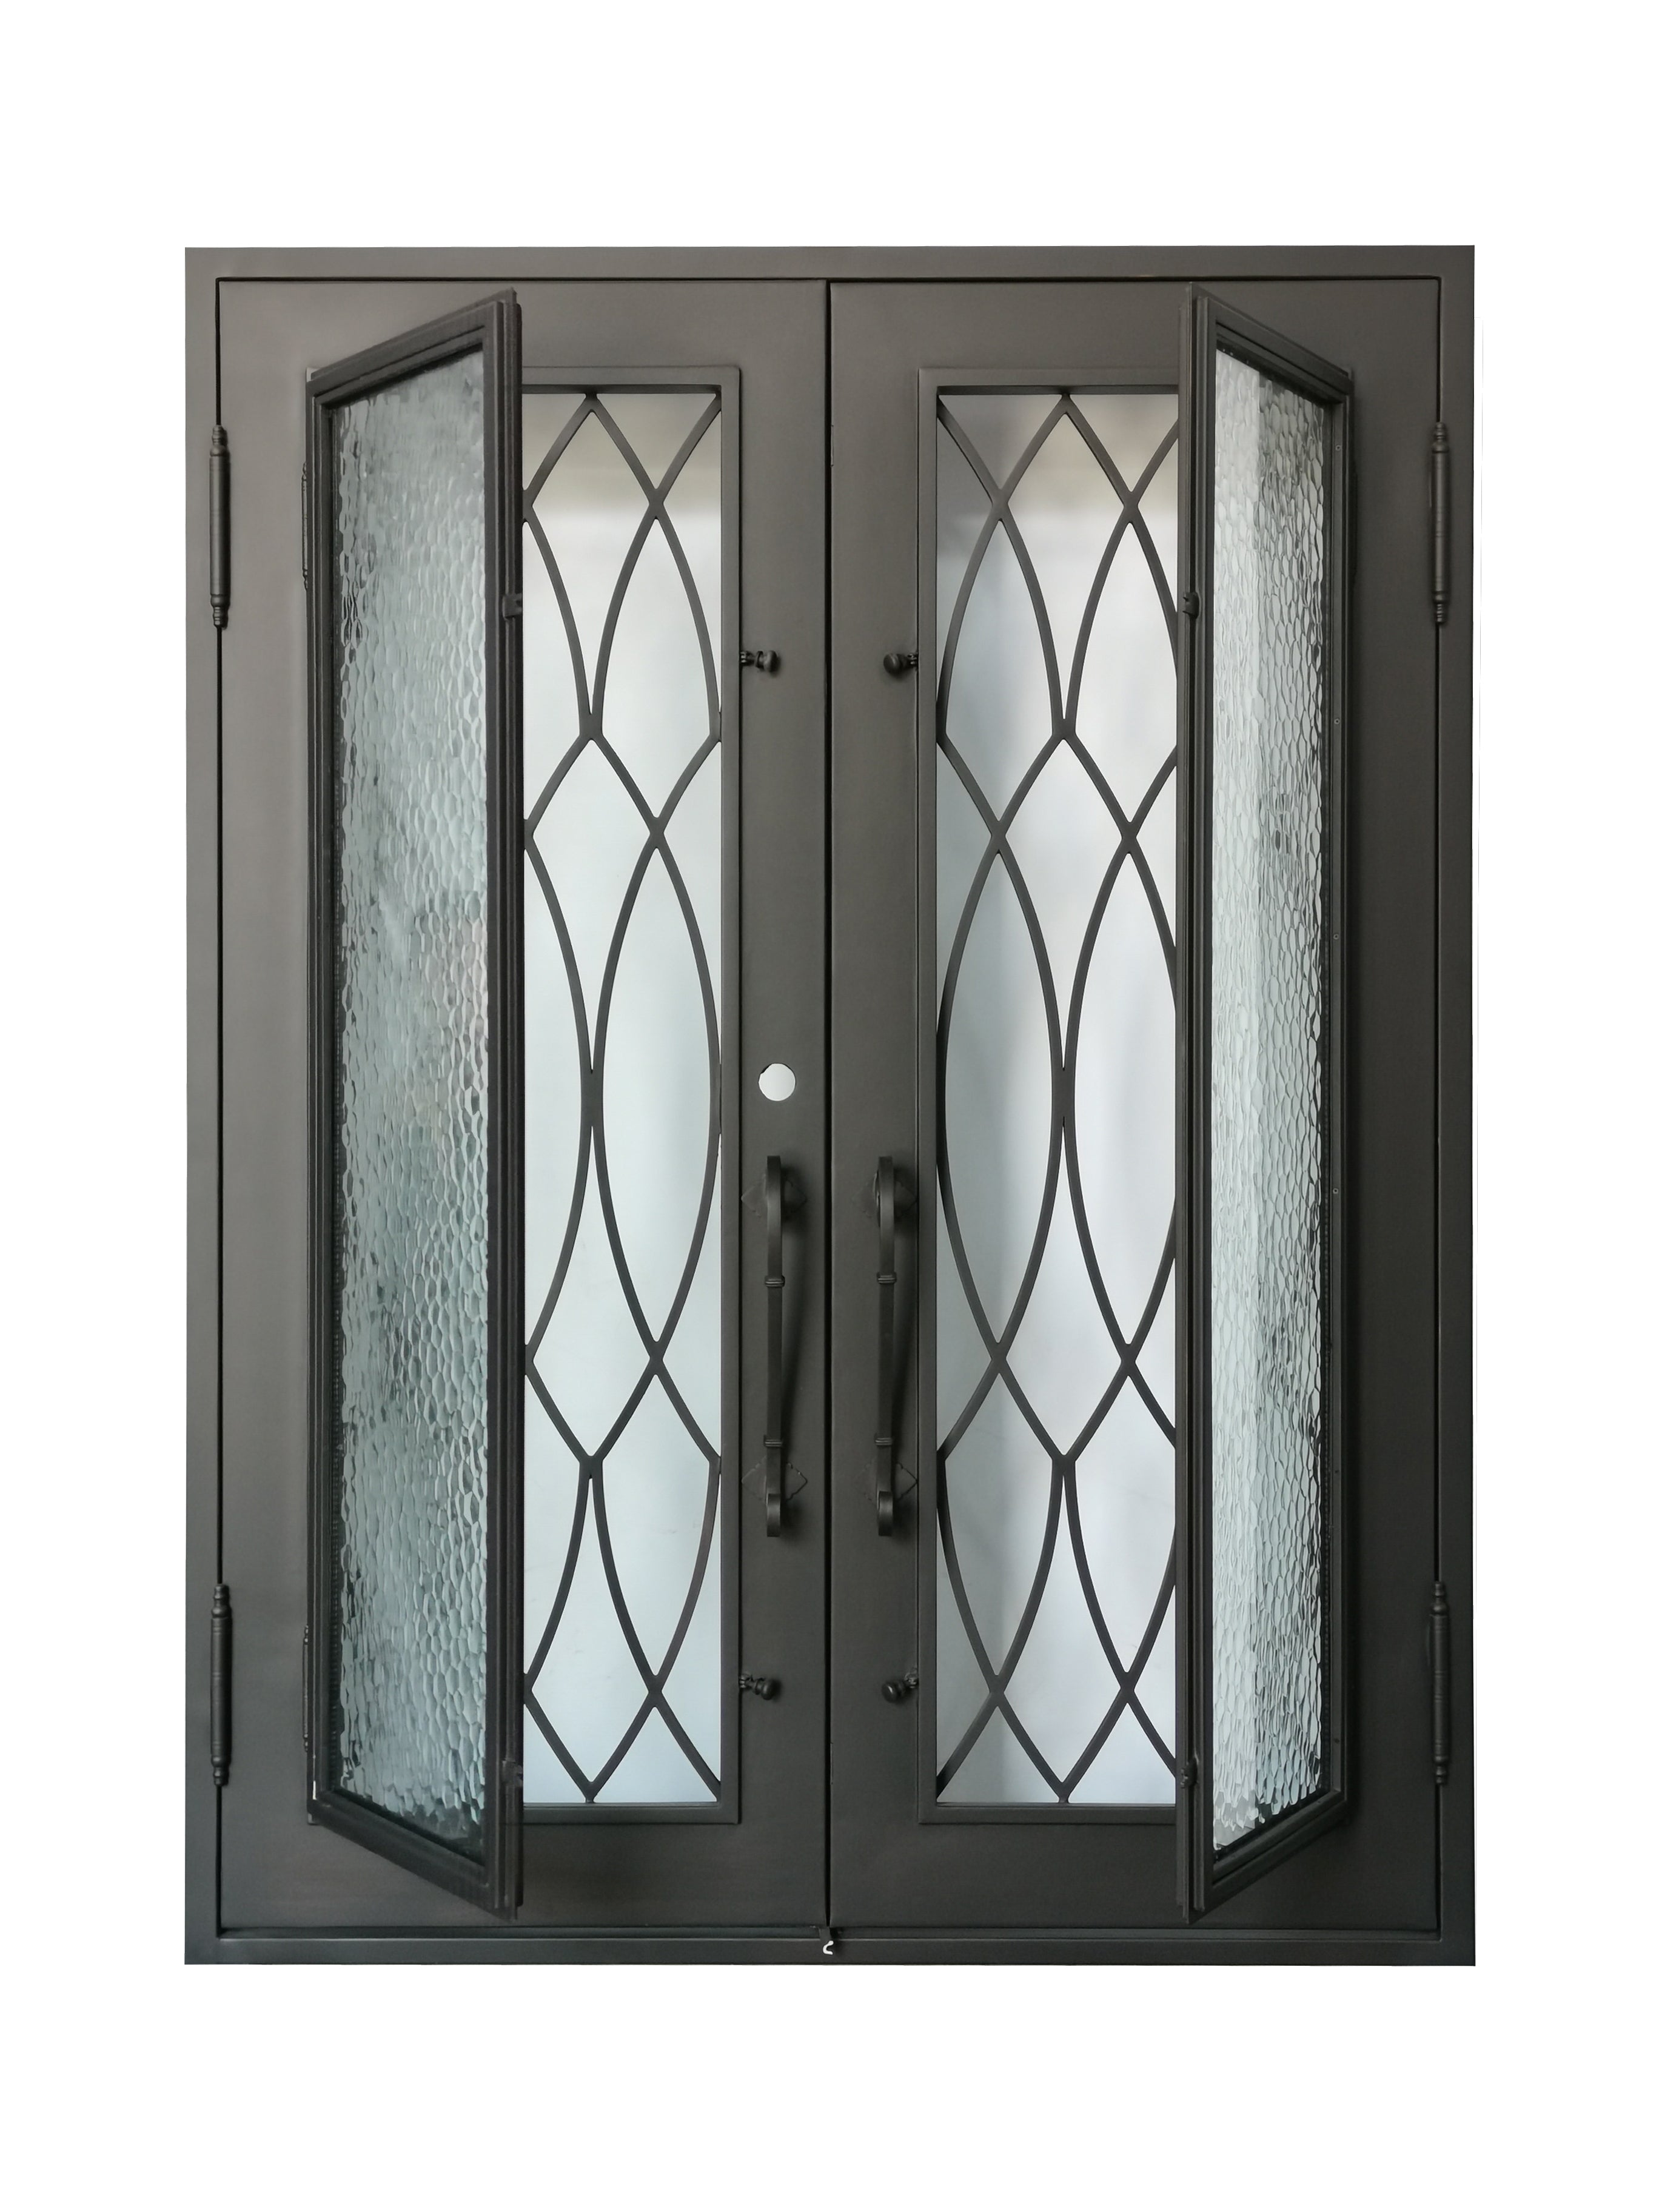 Burleson Model Double Front Entry Iron Door With Tempered Water Cube Glass Dark Bronze Finish - AAWAIZ IMPORTS